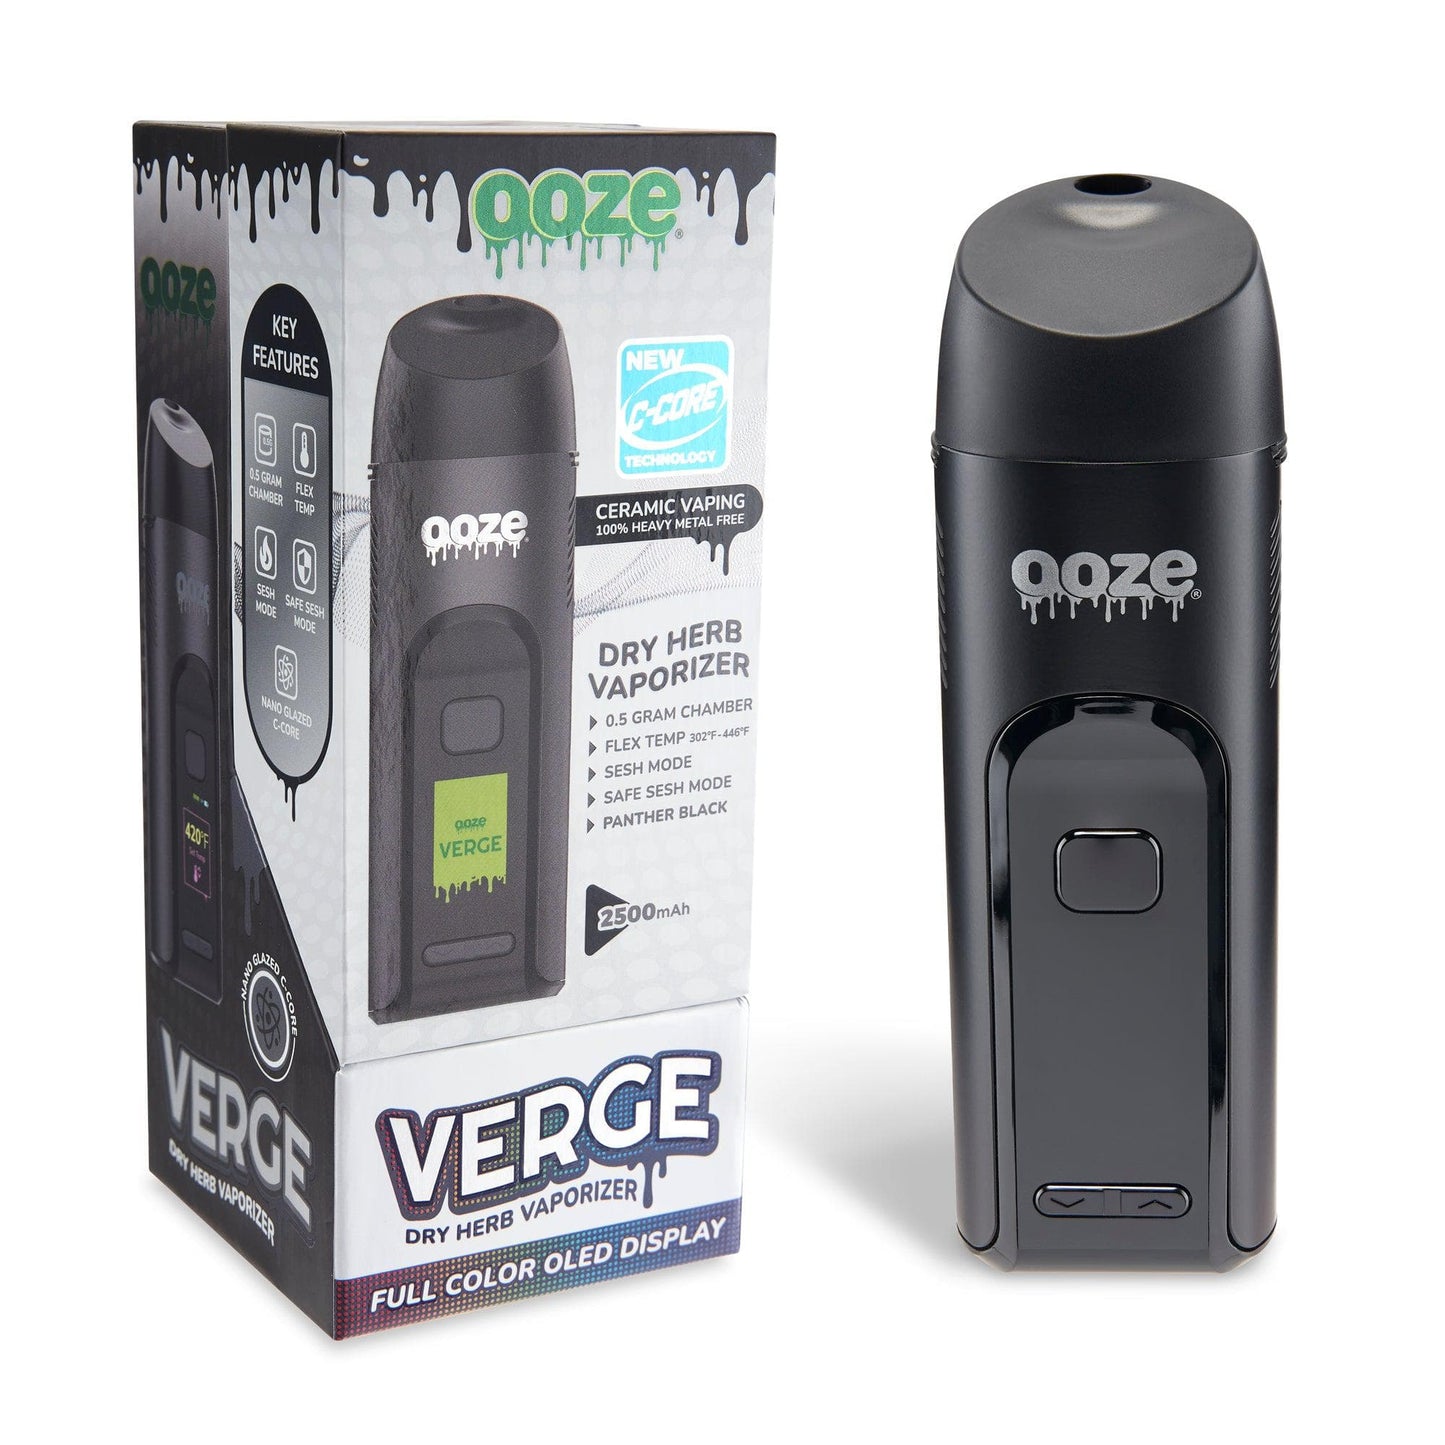 Ooze Batteries and Vapes Panther Black Ooze Verge Dry Herb Vaporizer – 2500 mAh C-Core